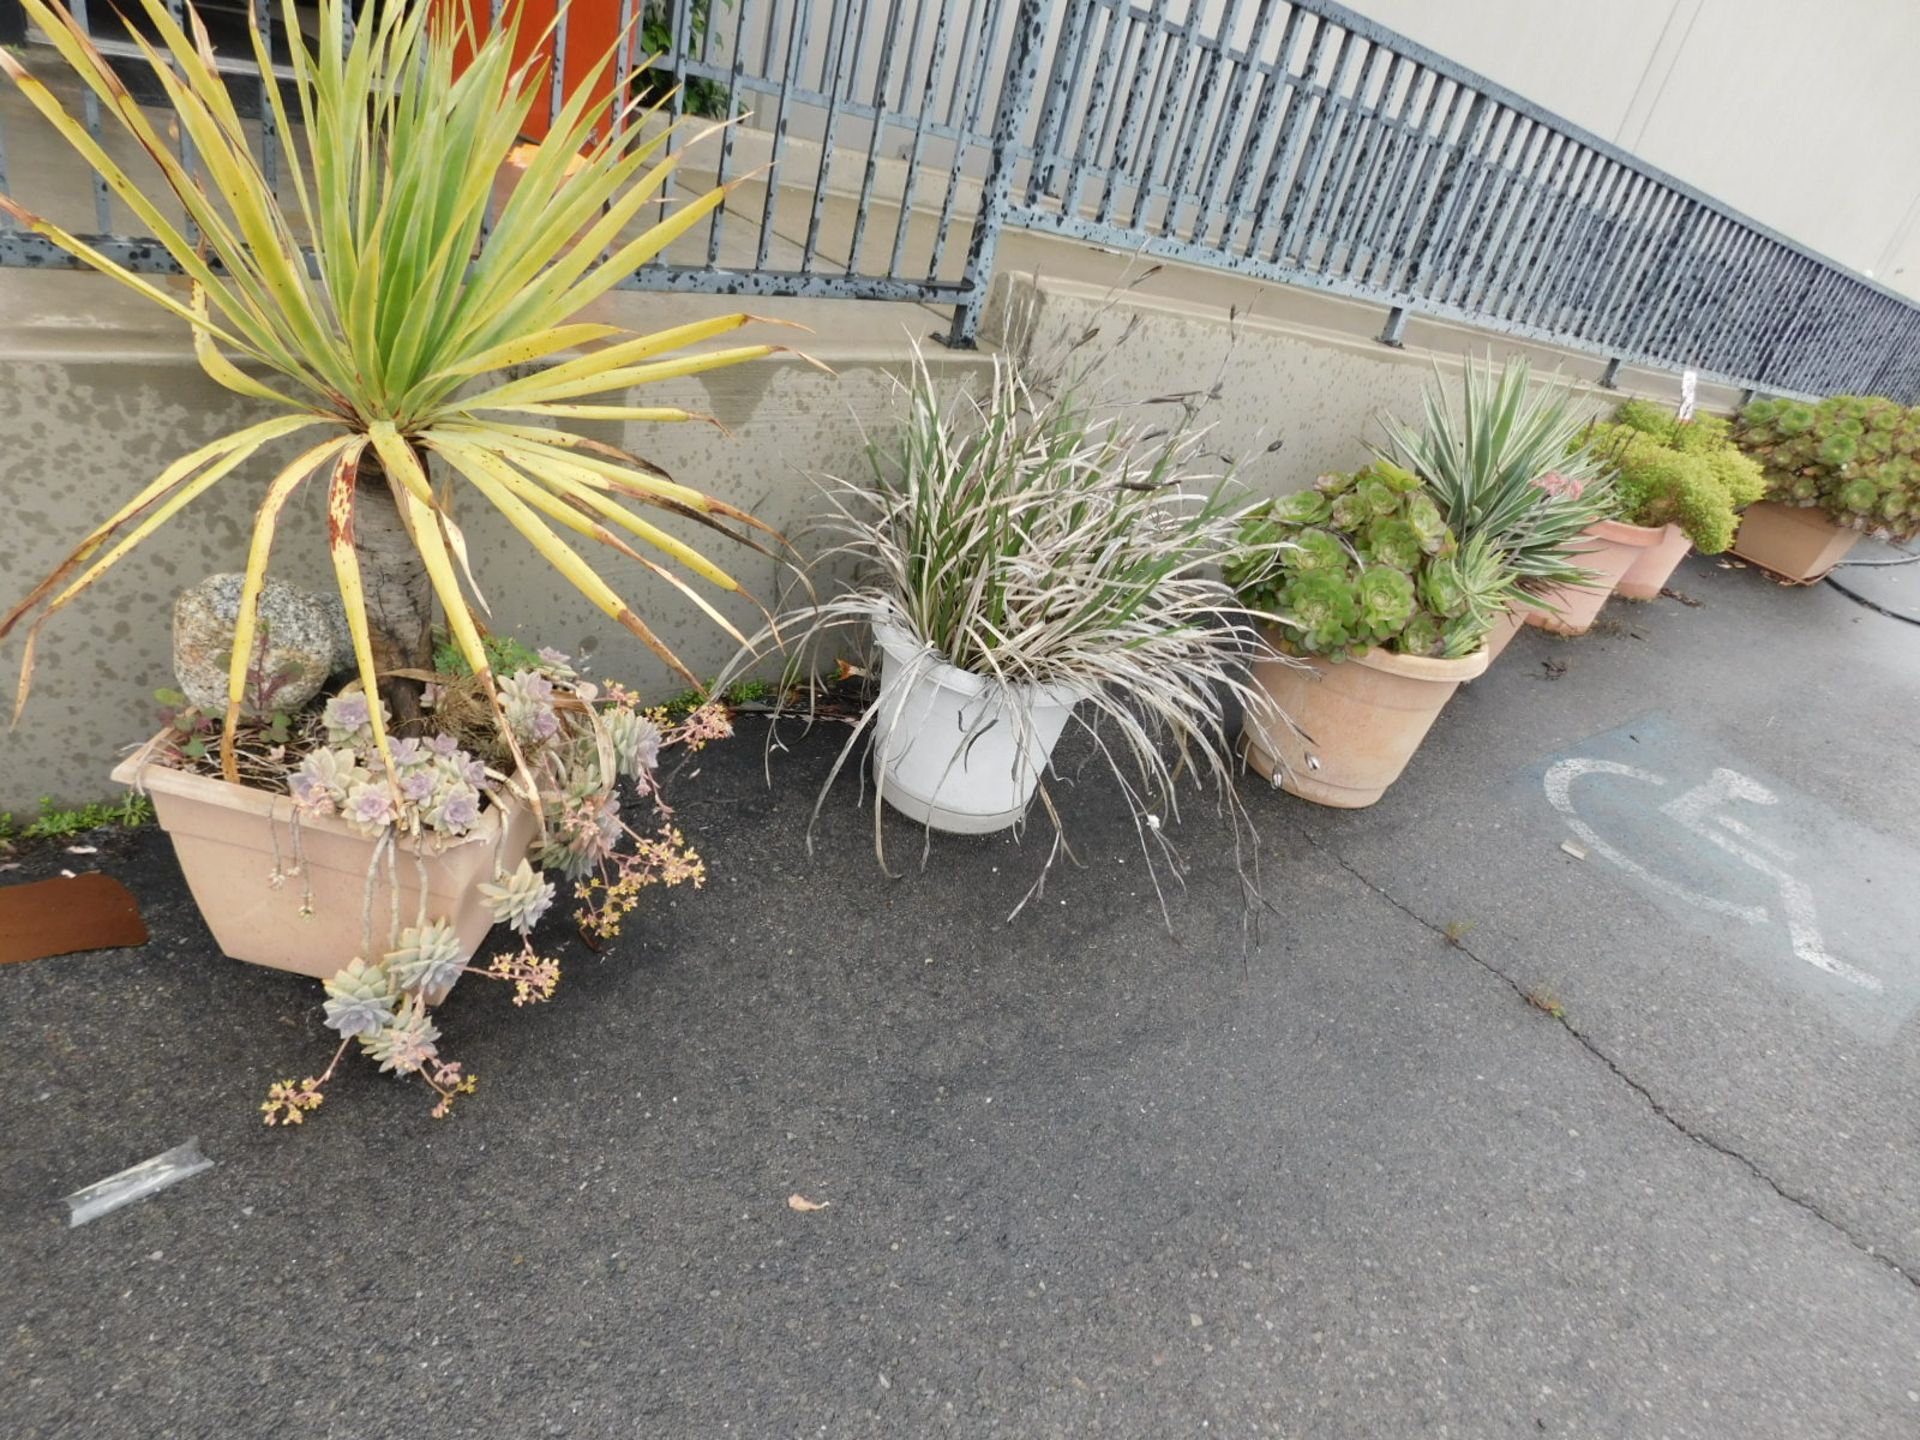 LOT - APPROX. (17) POTTED PLANTS, SUCCULENTS, ETC. - Image 2 of 3